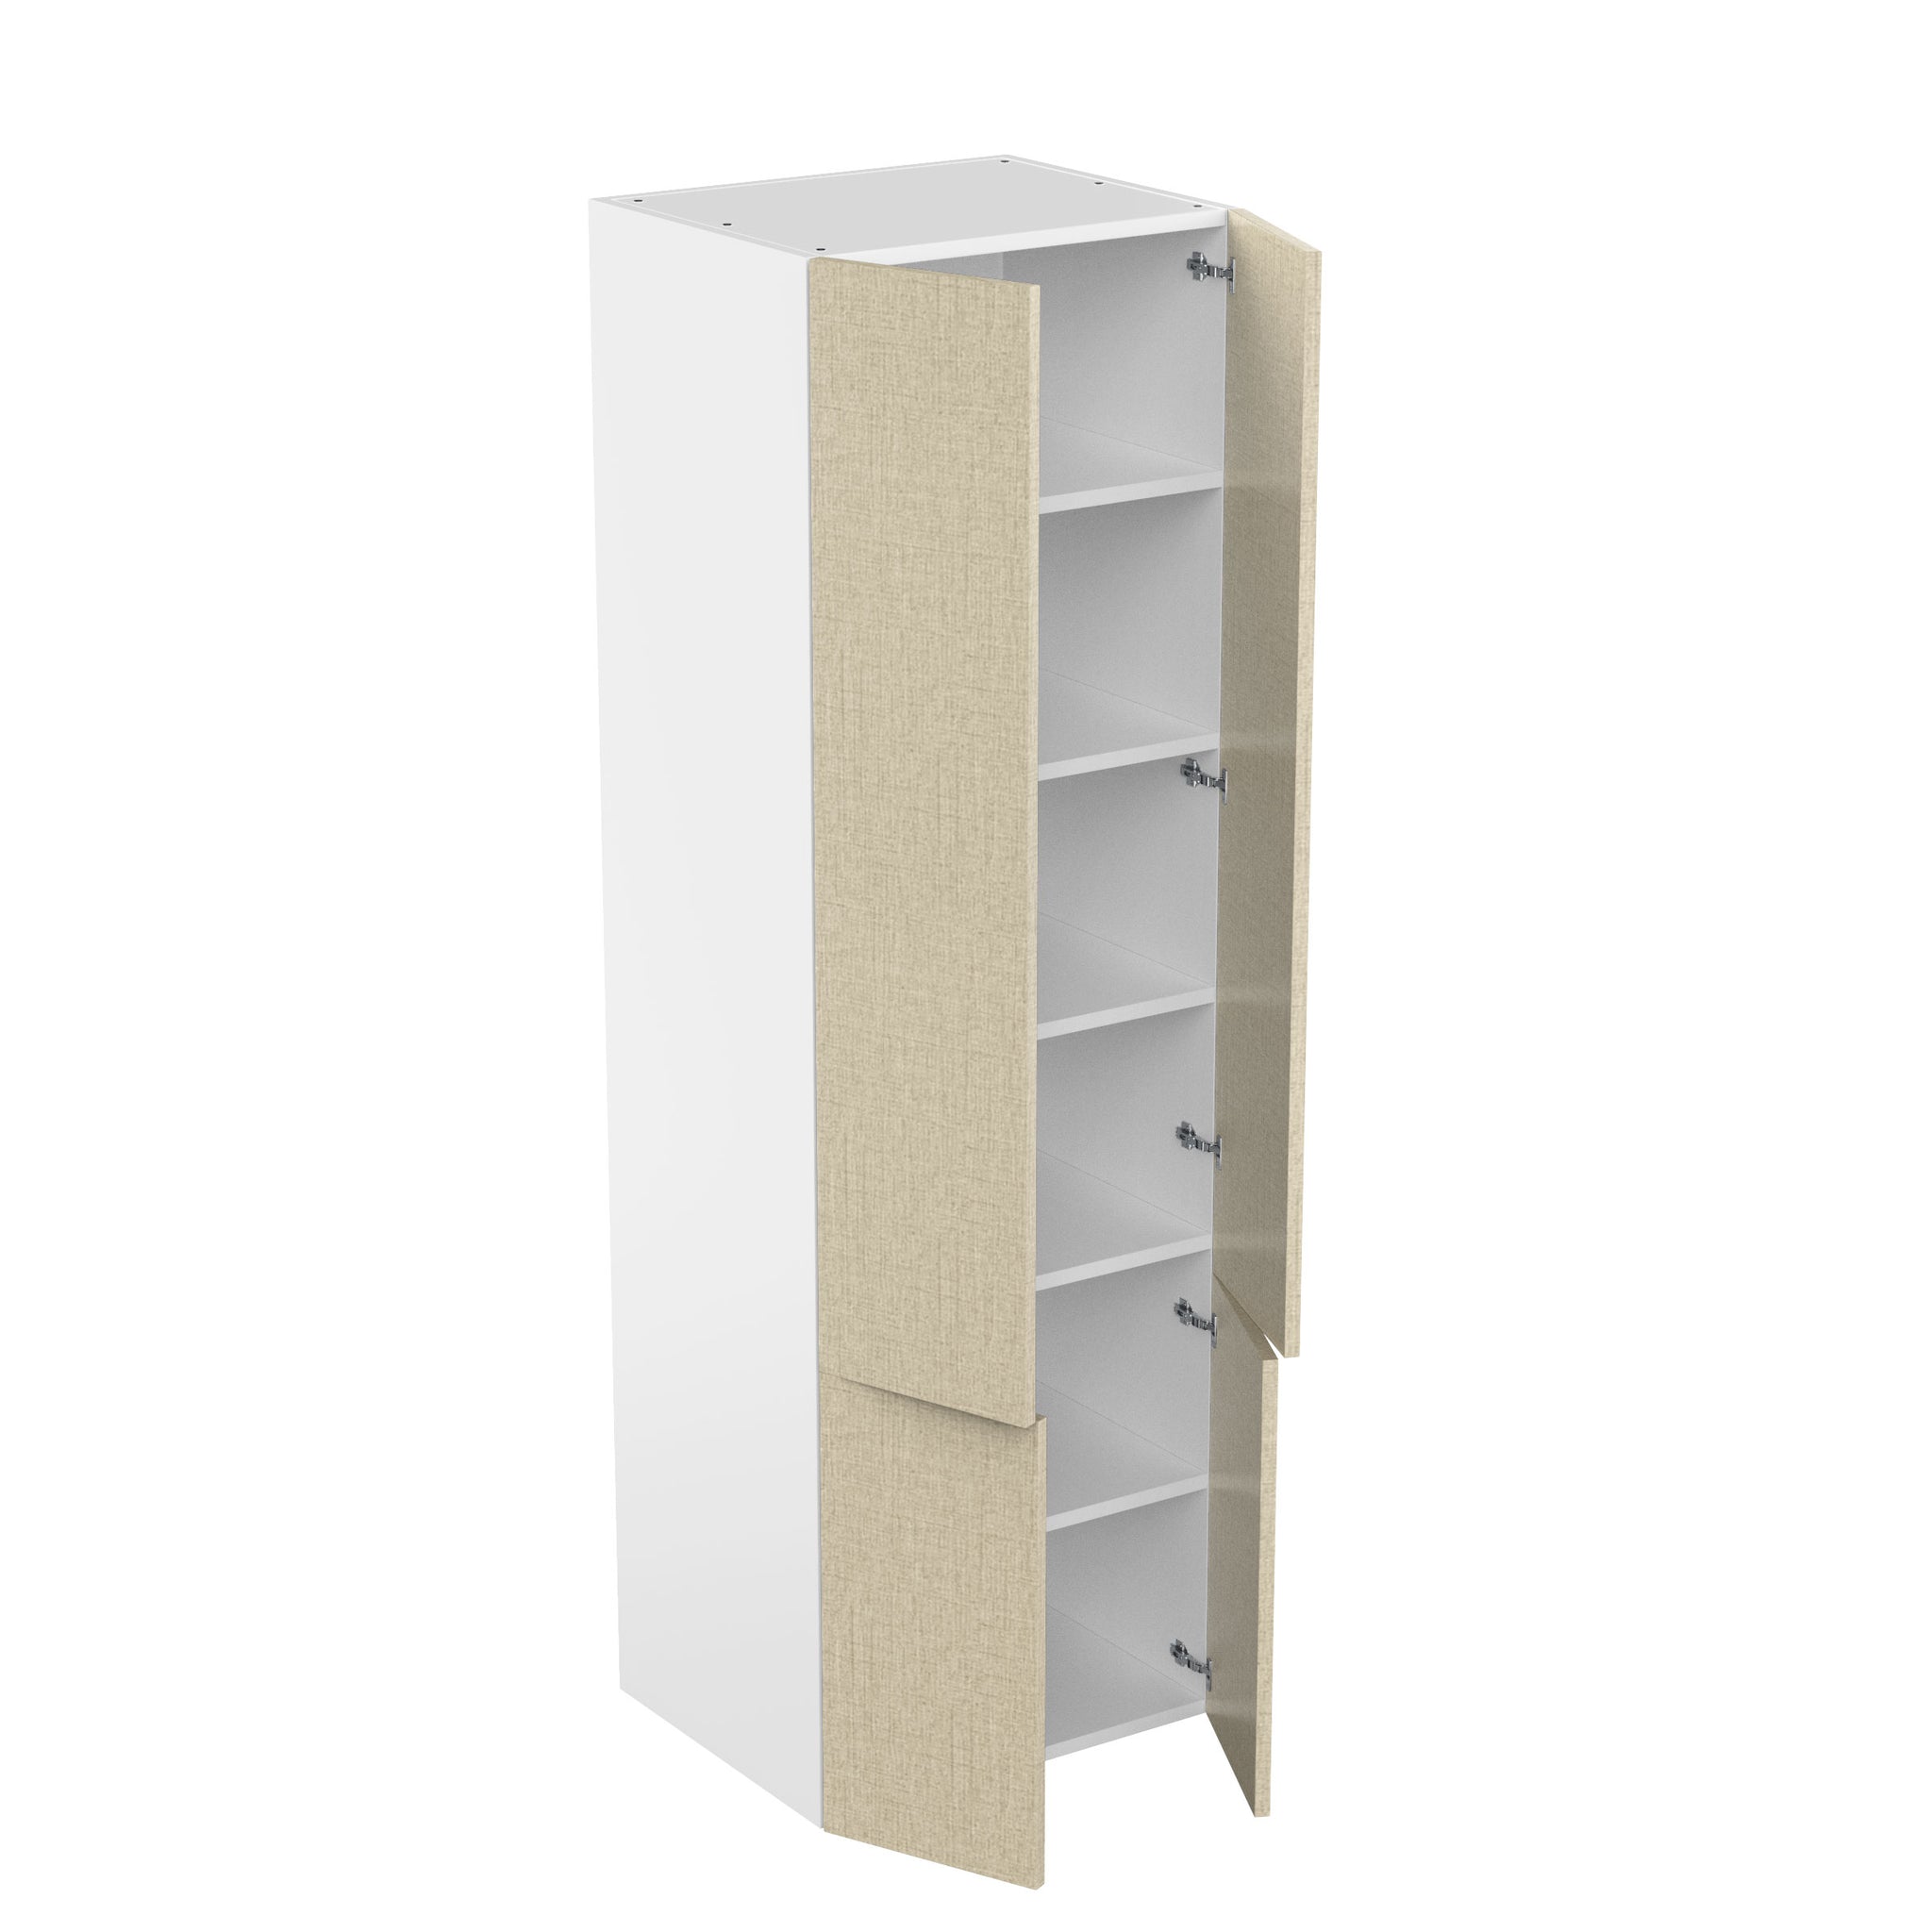 RTA - Fabric Grey - Double Door Tall Cabinets | 30"W x 96"H x 24"D